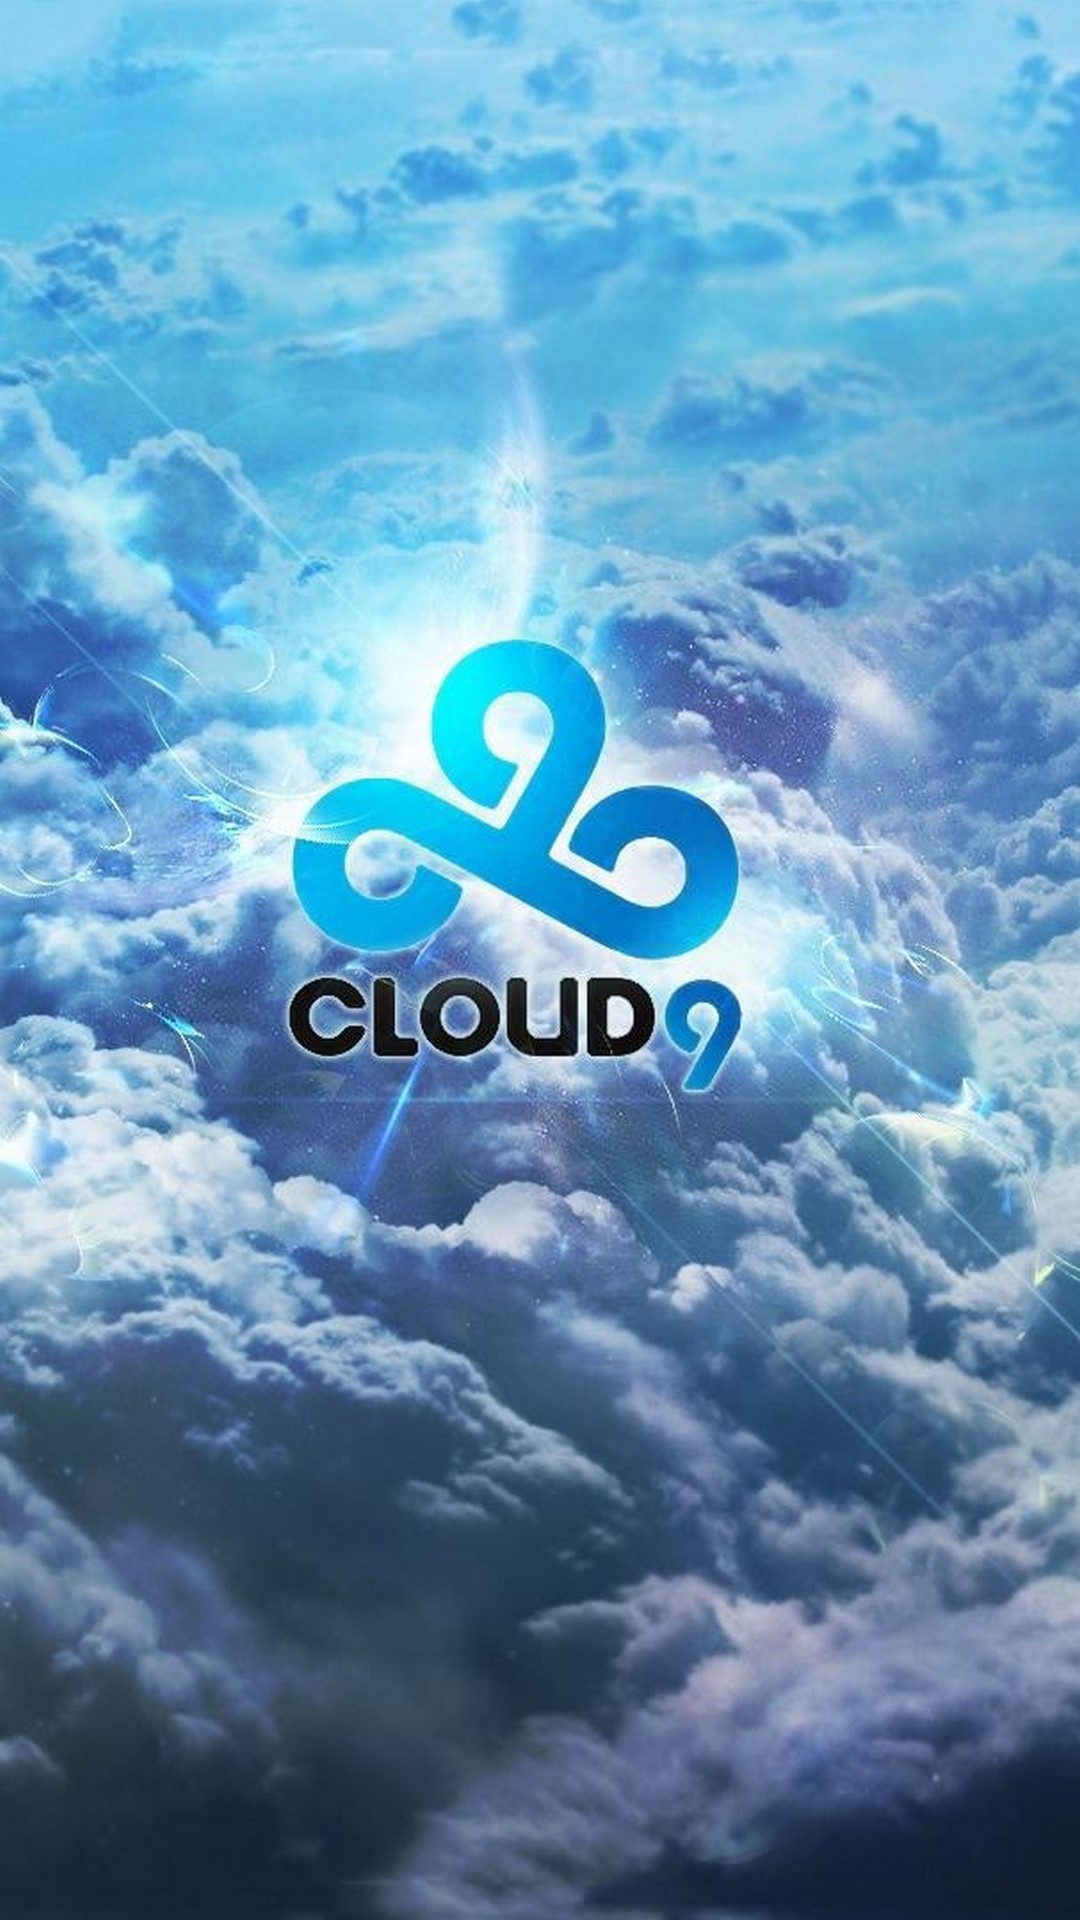 Android Wallpaper HD Cloud 9 Games with HD resolution 1080x1920